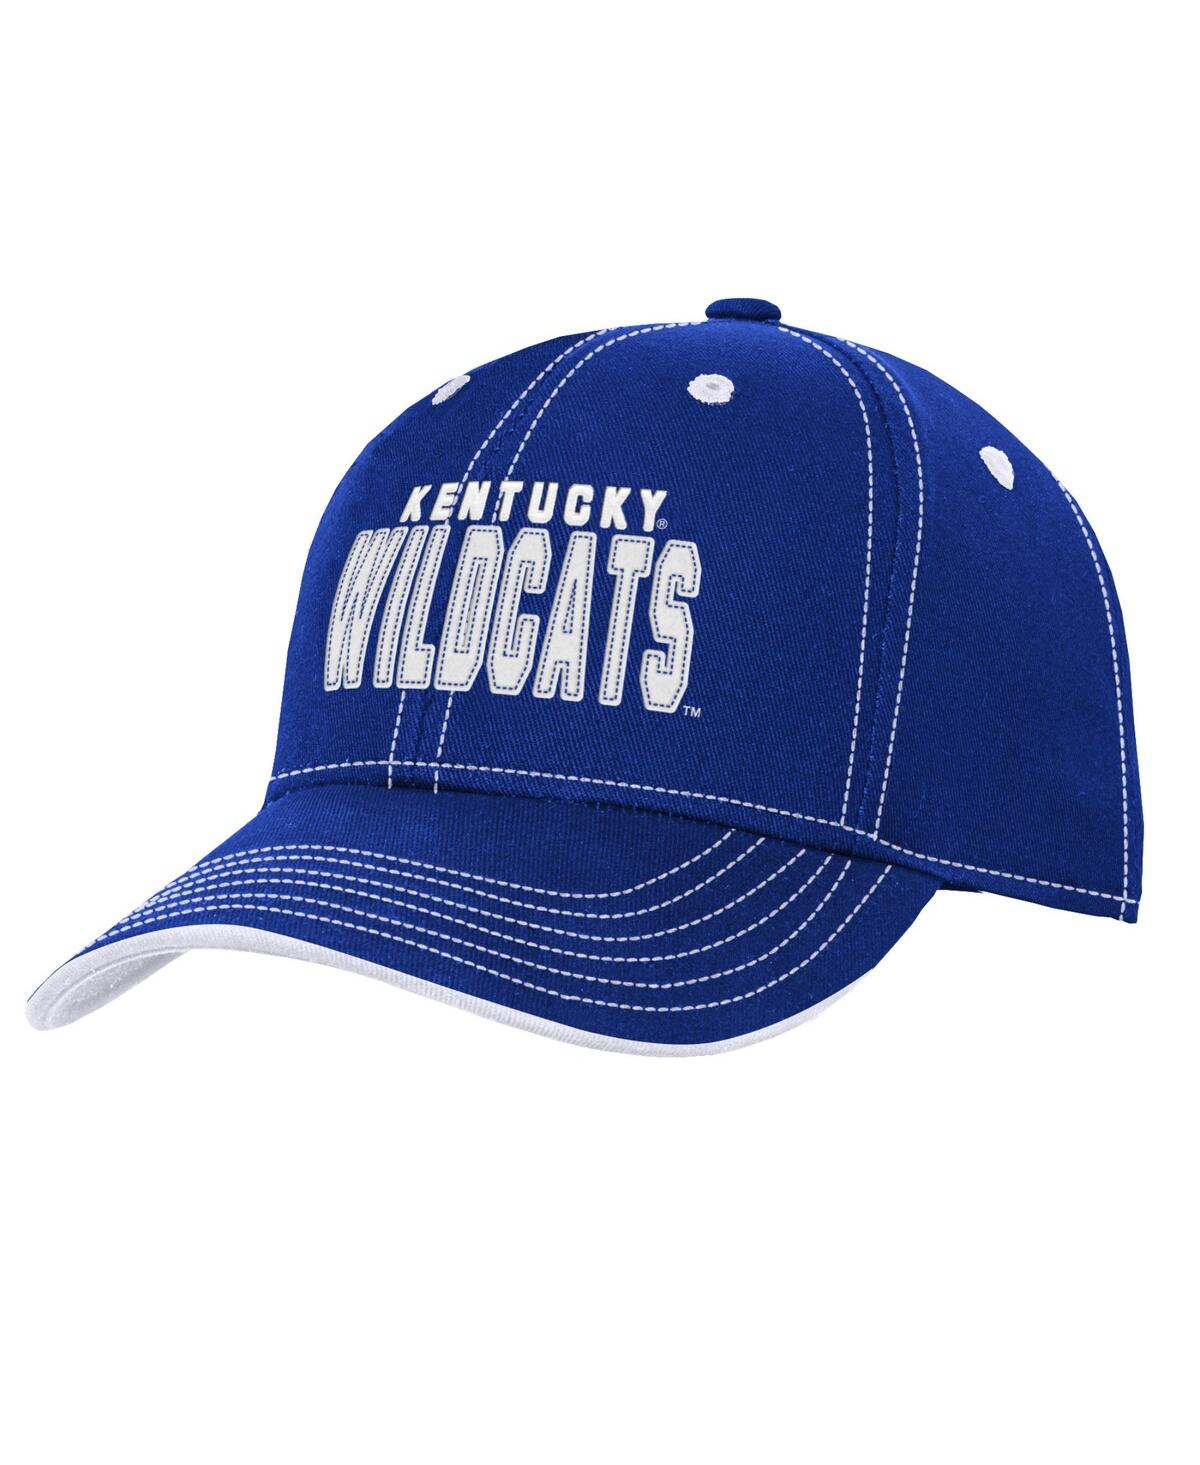 Outerstuff Kids' Big Boys And Girls Royal Kentucky Wildcats Old School Slouch Adjustable Hat